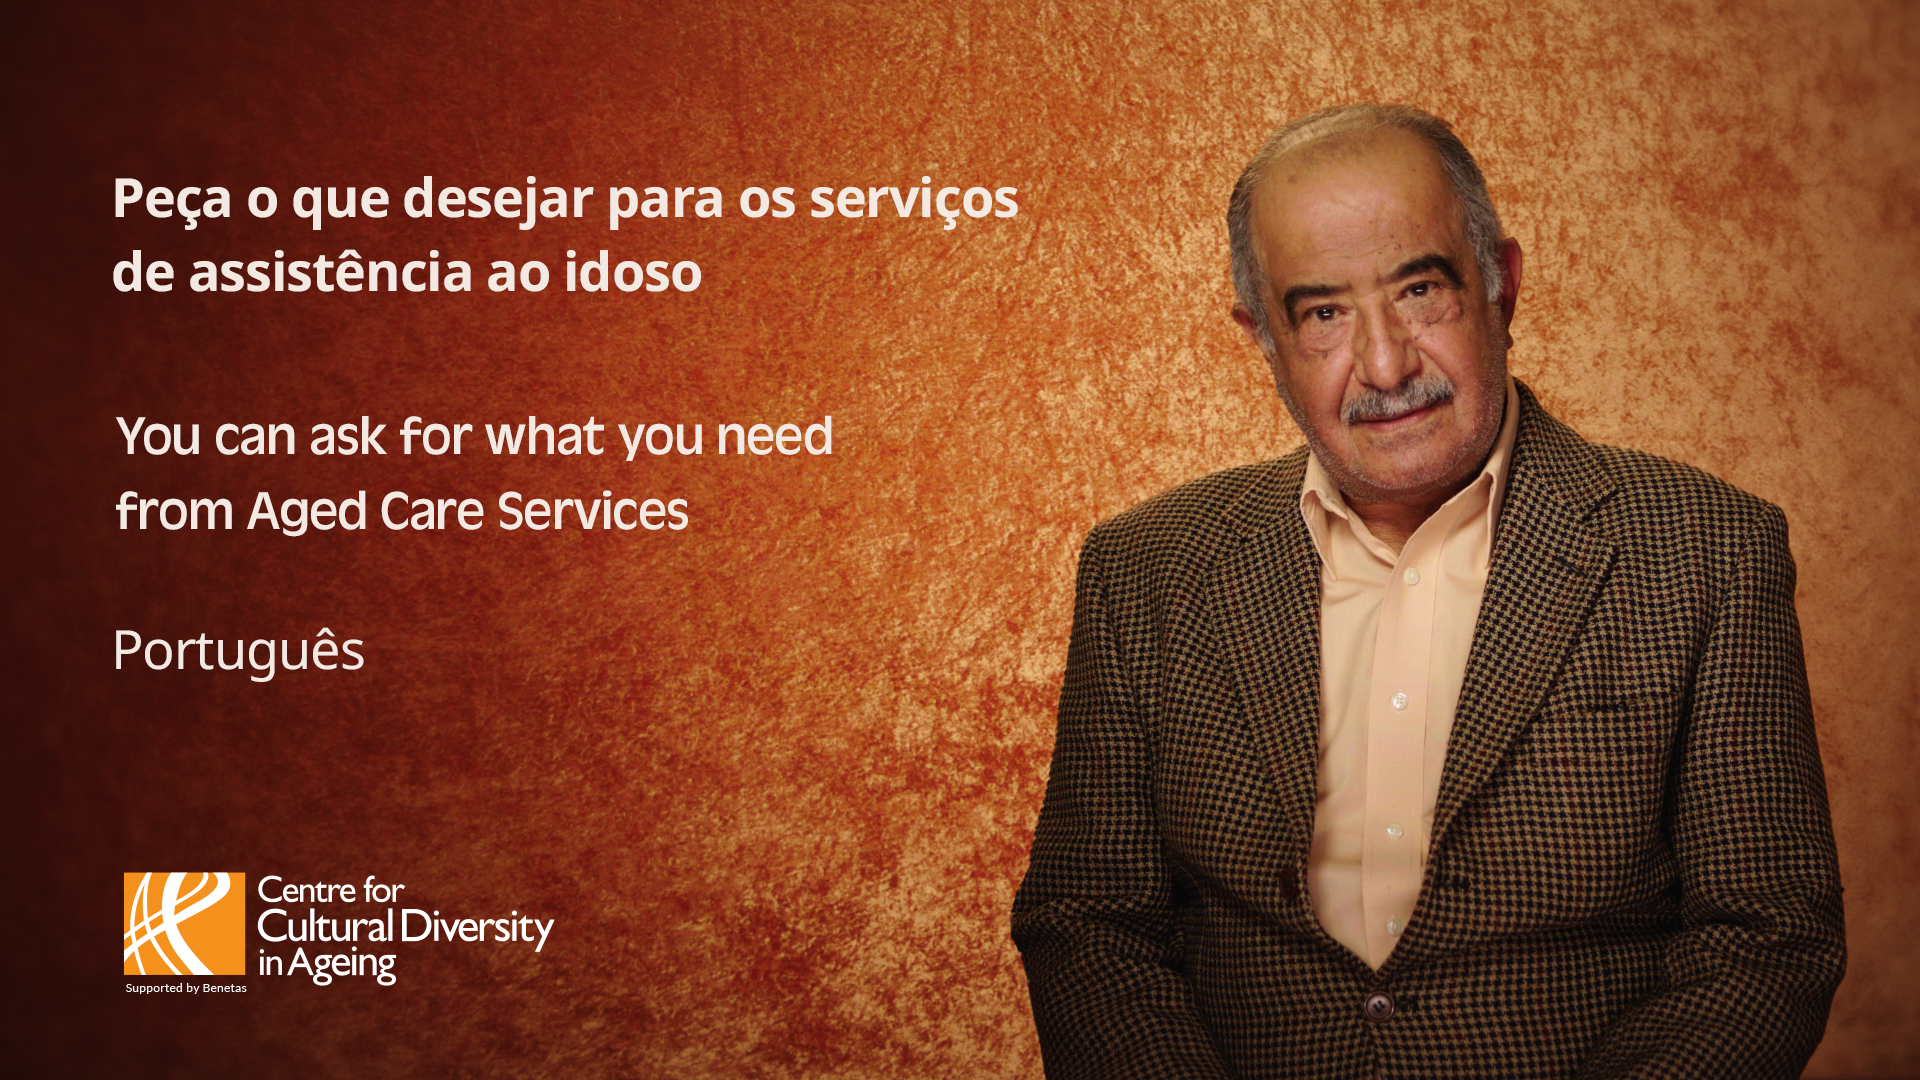 You can ask for what you need from aged care services portugues thumbnail